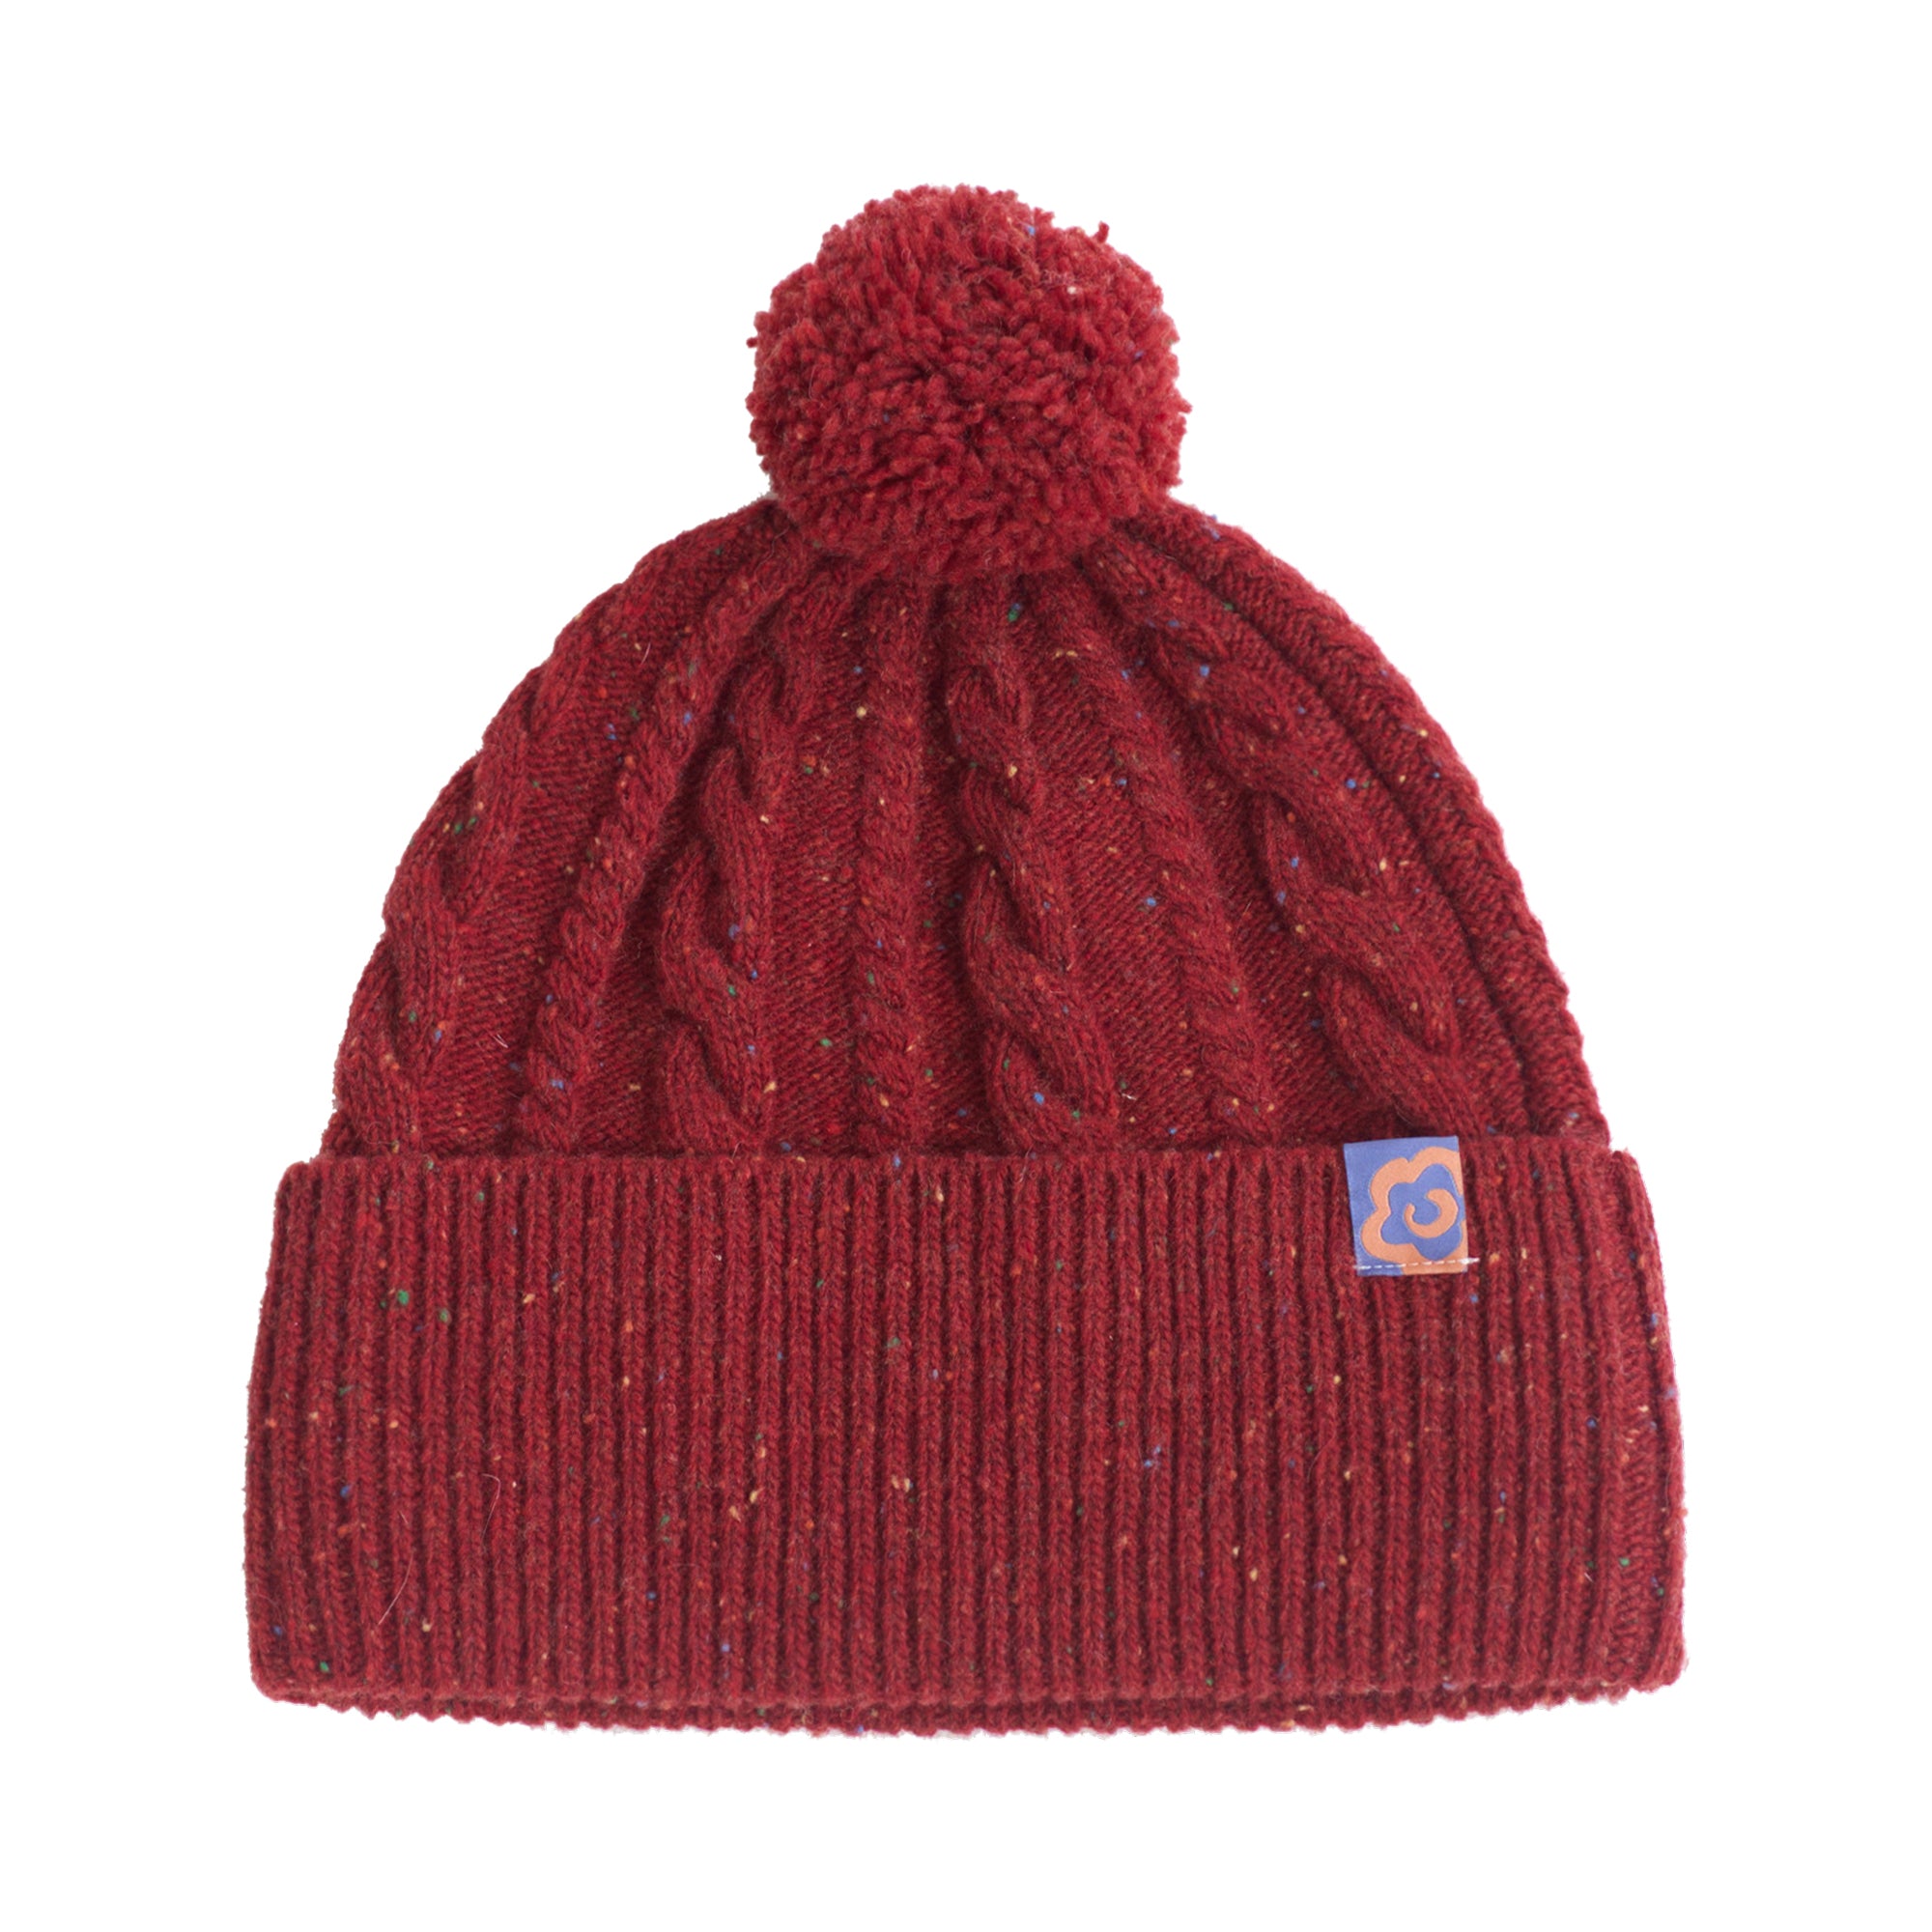 "Pom Pom" Cable Knit Wool Beanie Hat - Wine Red - Wine Red - LOST PATTERN Cashmere